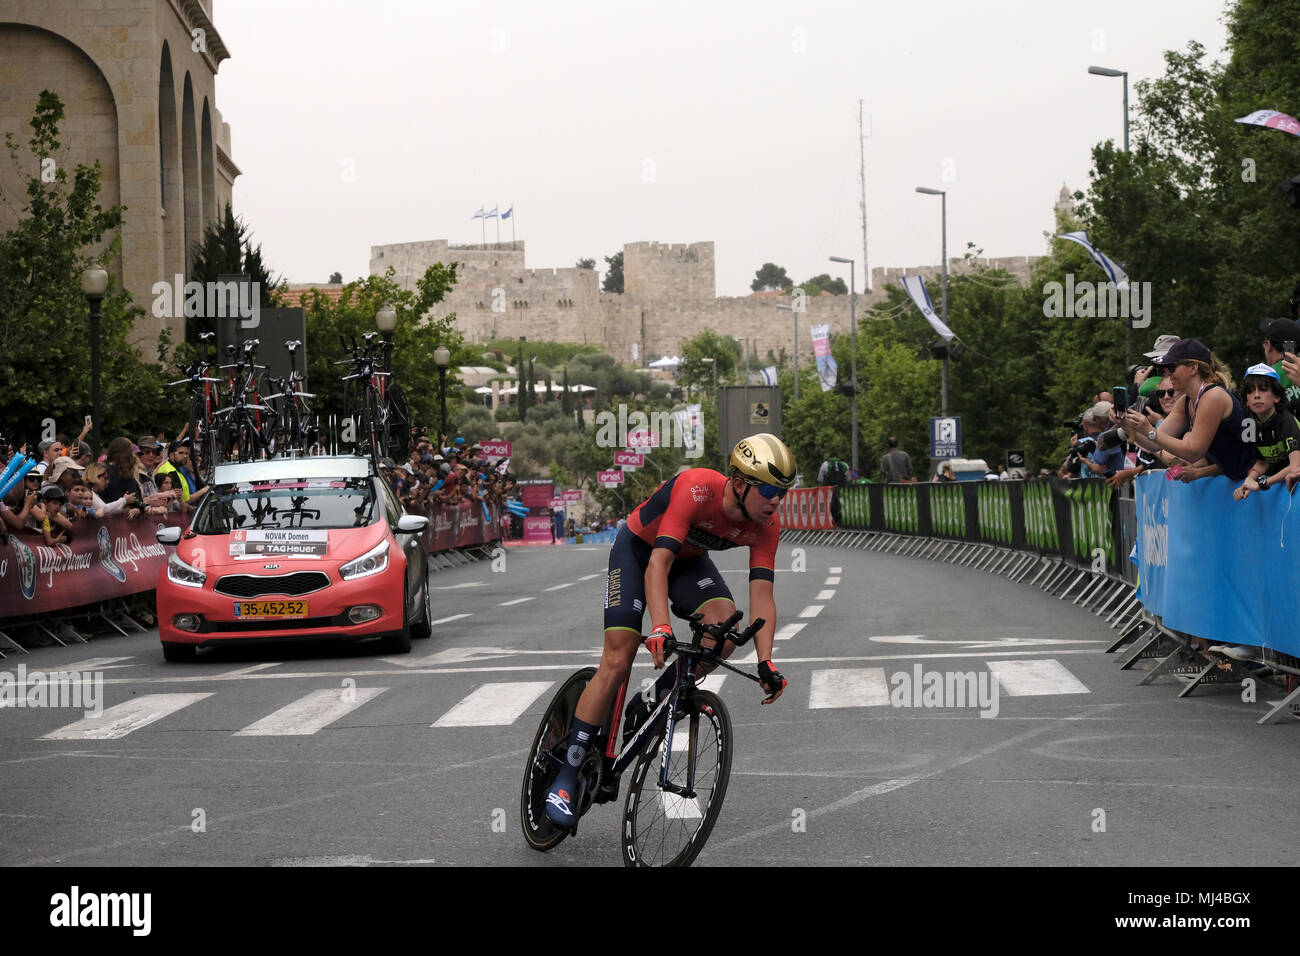 Jerusalem, Israel, 04 May 2018. Cyclist Novak Domen from Slovenia and Bahrain–Merida Pro Cycling Team sprints during  the 101st Giro d'Italia, Tour of Italy in the 1st stage which is 9,7 kilometers individual time-trial. The race's 'Big Start', beginning today, marks the first time any of cycling's three major races -- the Giro, Tour de France and Vuelta a Espana -- will begin outside of Europe. Credit: Eddie Gerald/Alamy Live News Stock Photo